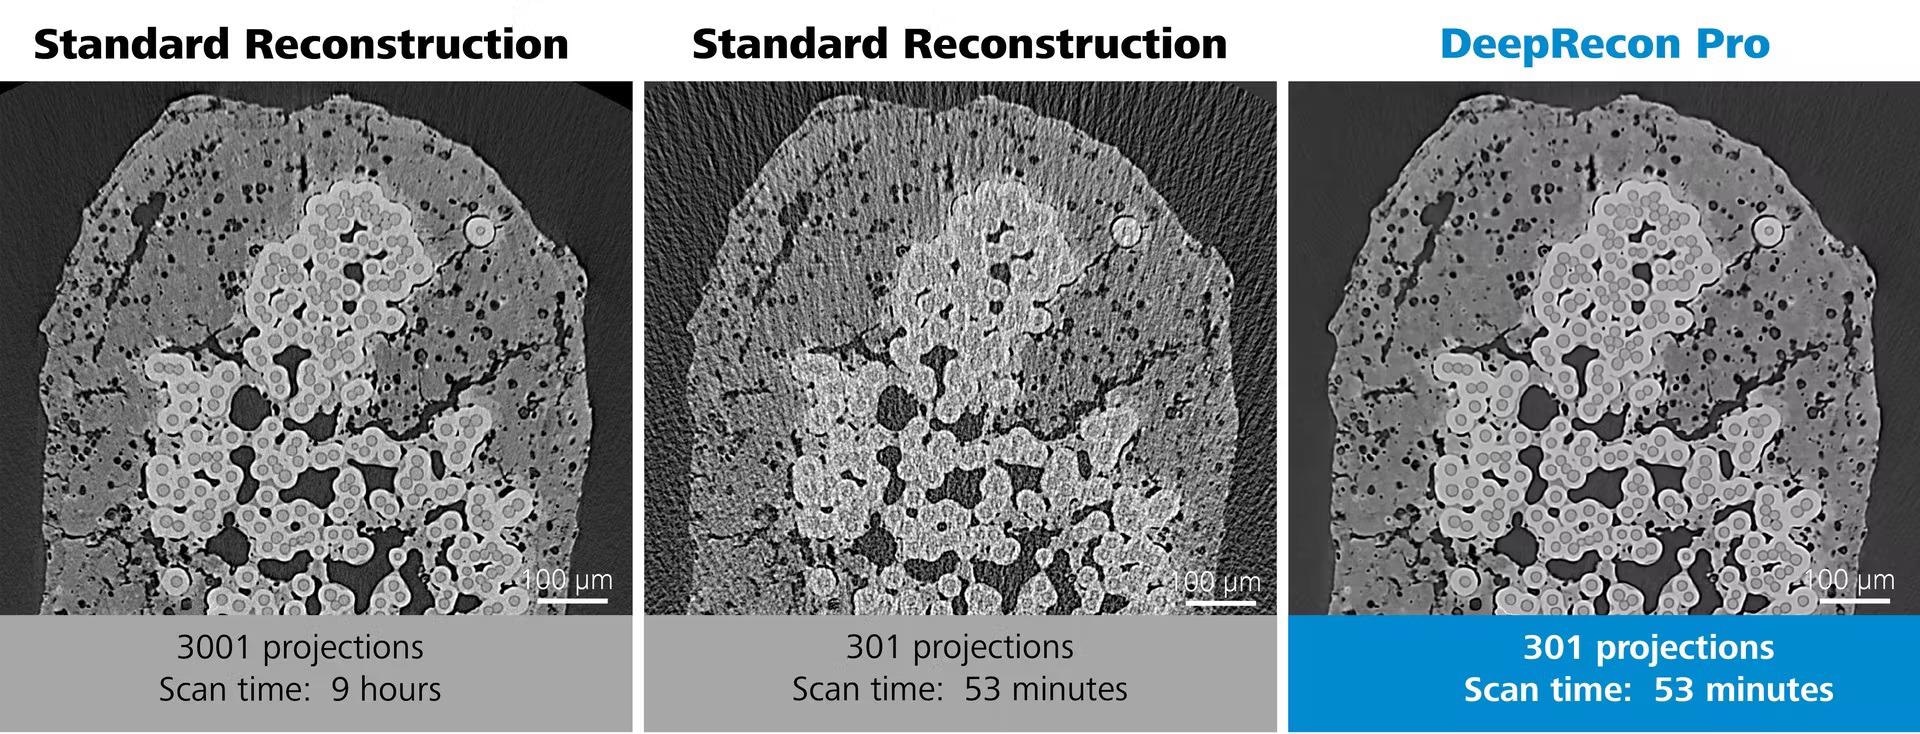 DeepRecon Pro used for throughput improvement for Ceramic Matrix Composite (CMC) sample, achieving 10× throughput improvement without sacrificing image quality. This would allow for much higher temporal resolution for in situ studies. Left: Standard reconstruction (FDK): Scan time 9 hrs (3001 projections). Center: Standard reconstruction (FDK): Scan time 53 mins (301 projections). Right: DeepRecon Pro: Scan time 53 mins (301 projections).